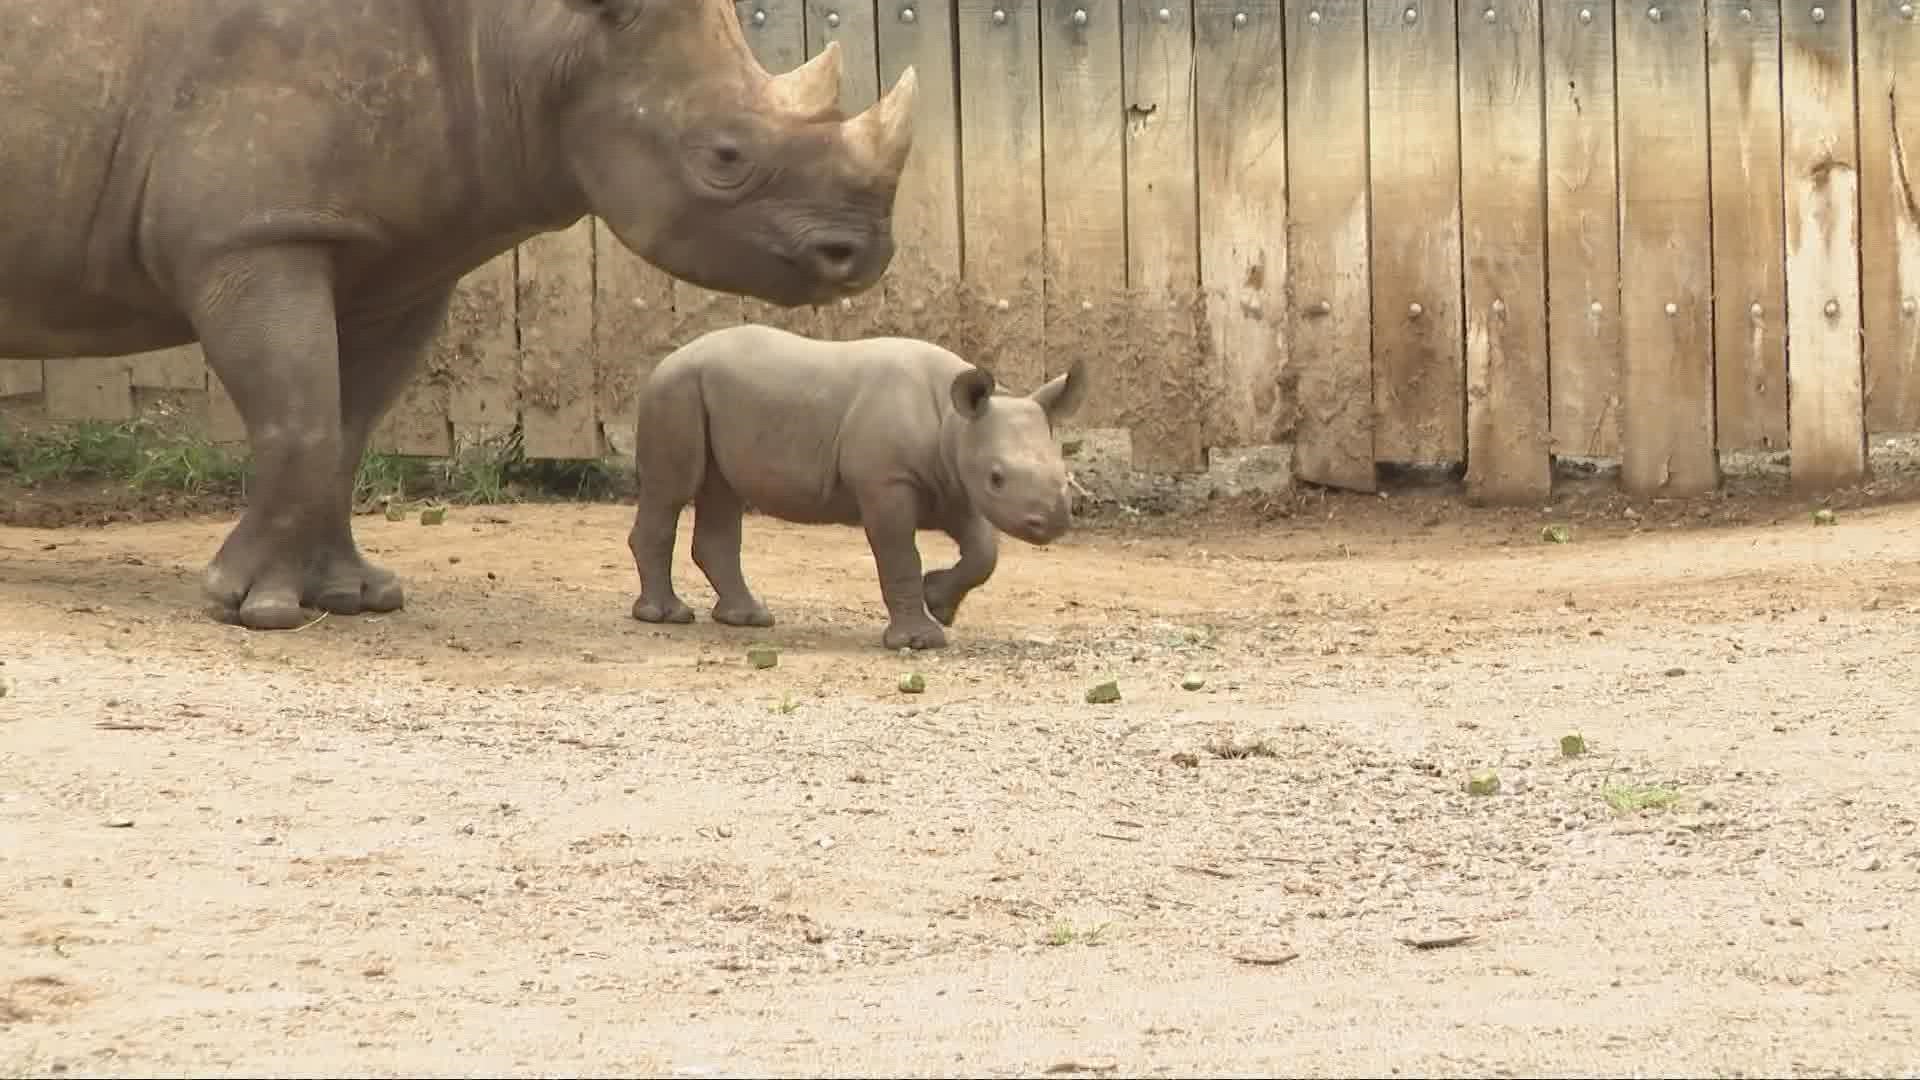 Today was the first day guests were able to see Dalia the baby rhino at the Cleveland Metroparks Zoo, but she's already making a positive impact for rhinos worldwide